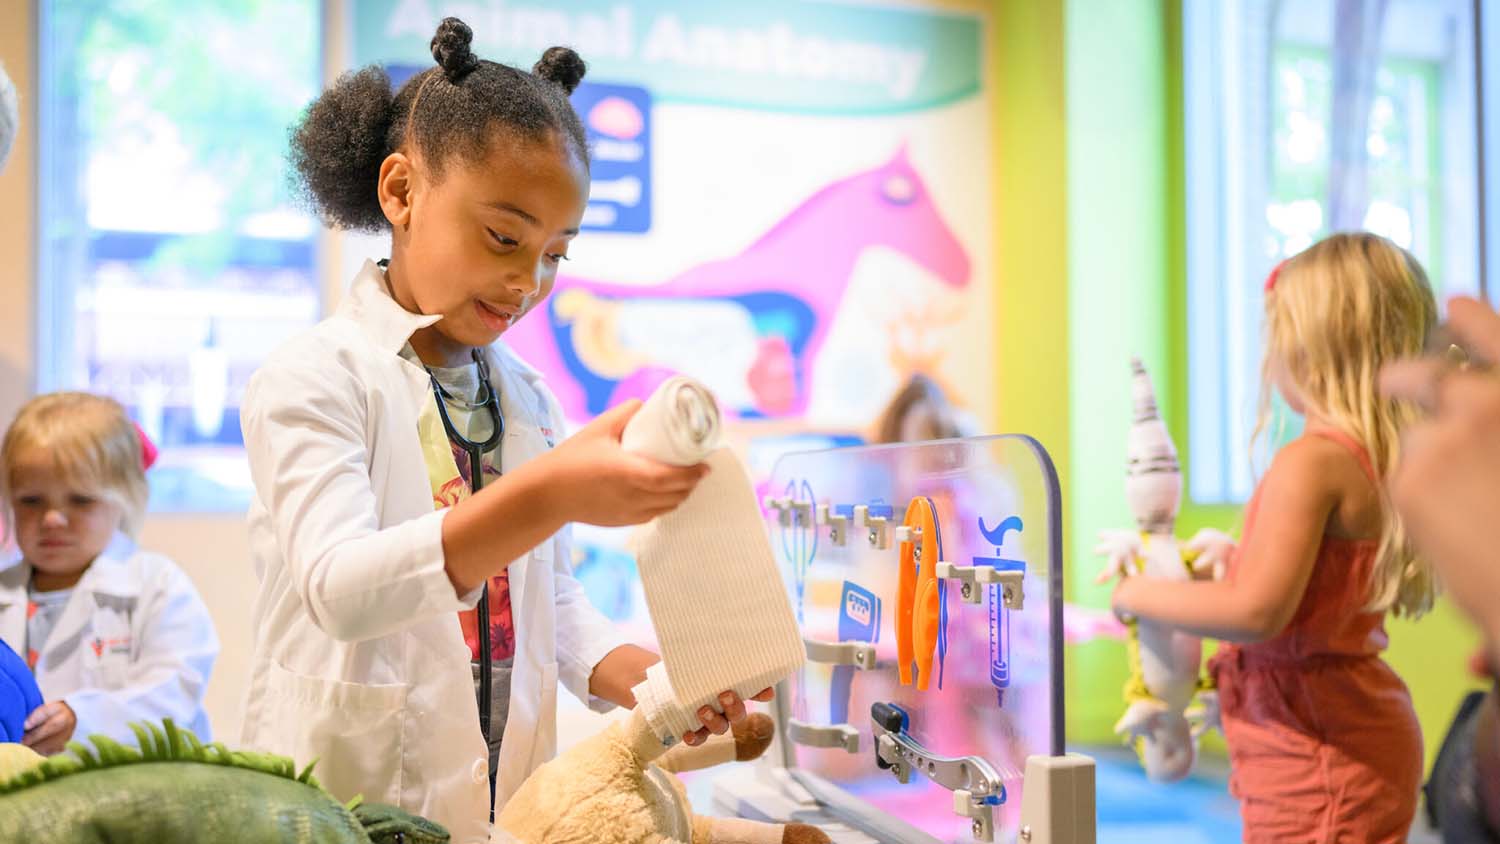 Children wear white coats and play with stuffed animals in an interactive vet-themed play area.